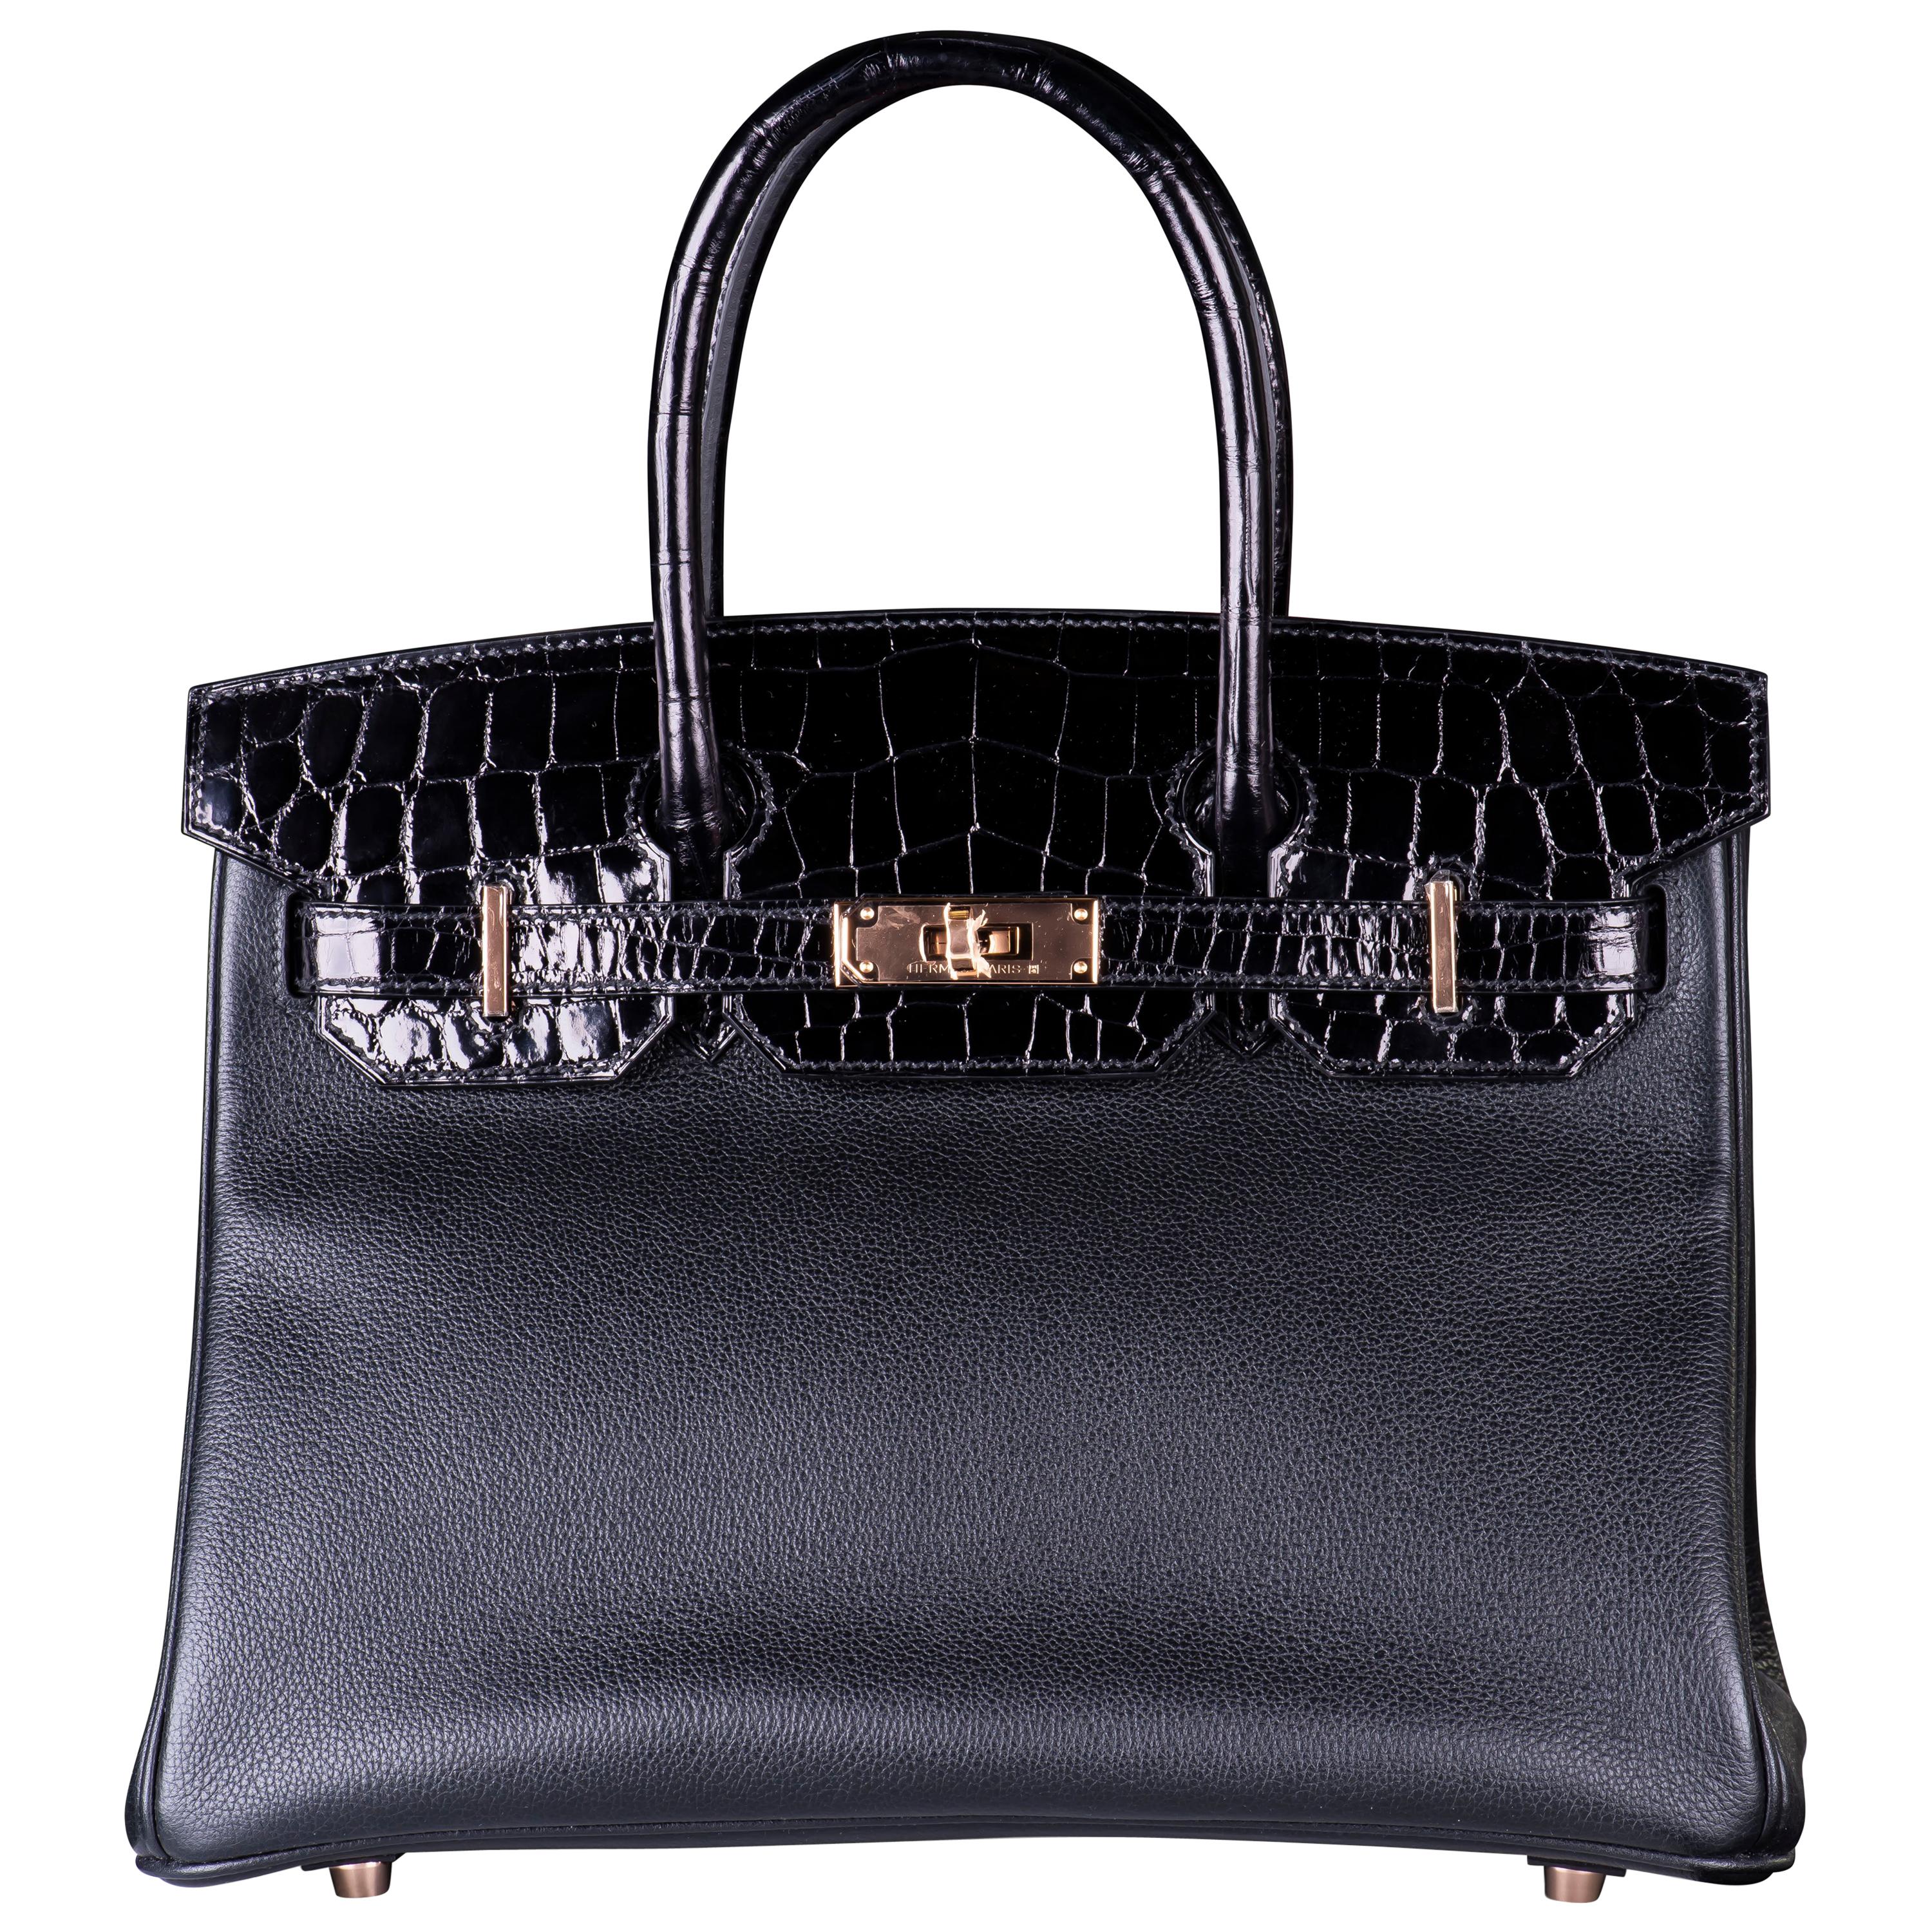 HERMES 30cm BLACK CROCODILE & CLEMENCE LEATHER WITH ROSE GOLD HARDWARE For Sale